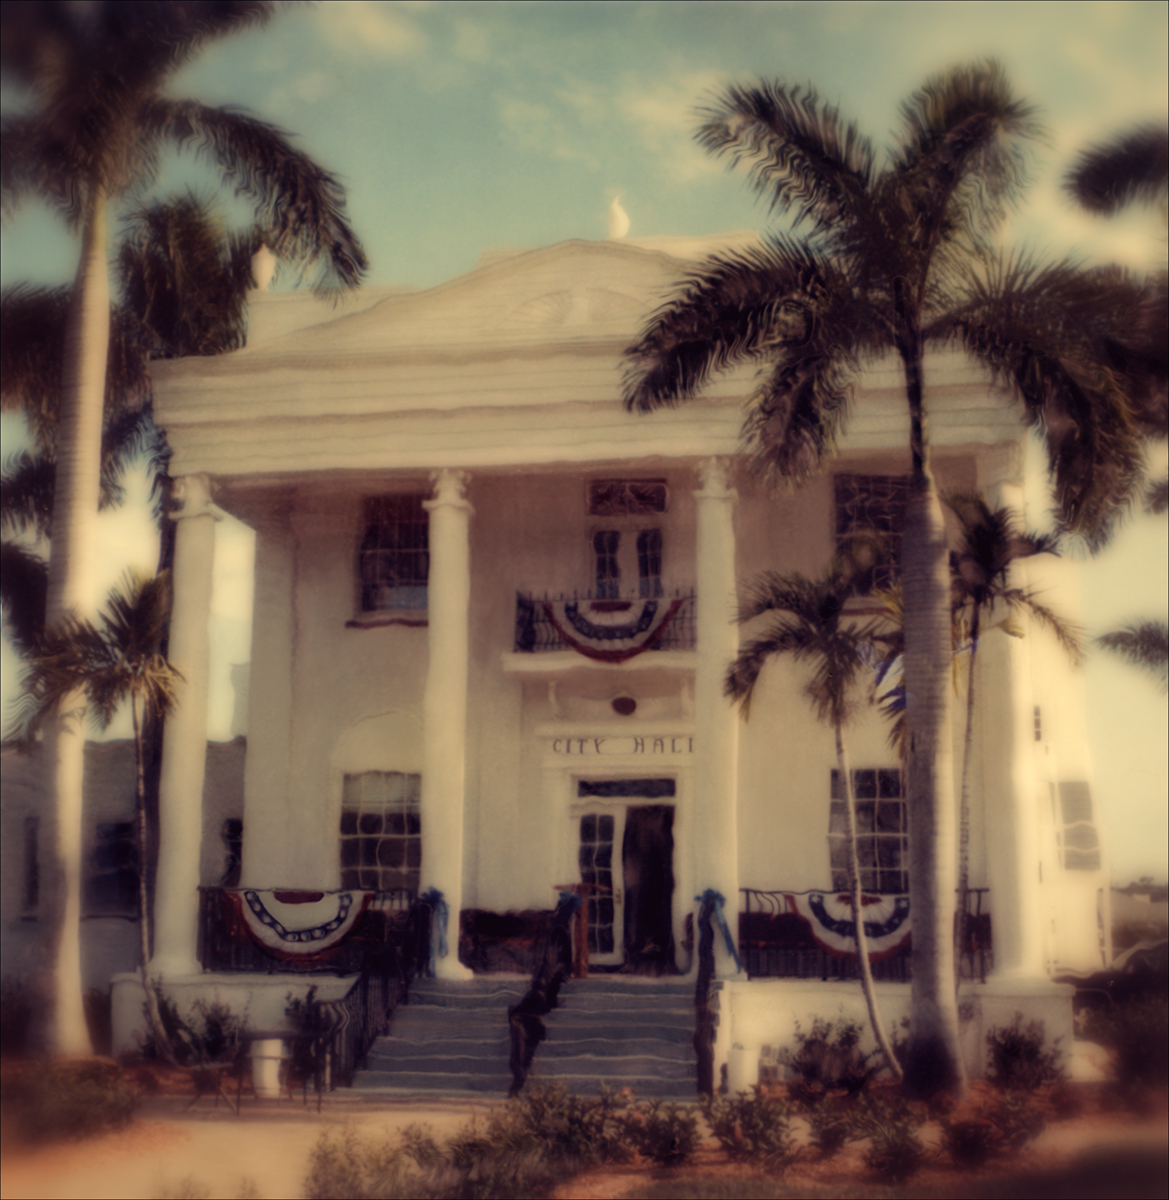 "City Hall" <br>Colonial-Style Building with Royal Palms and American Flags, Everglades City, FL